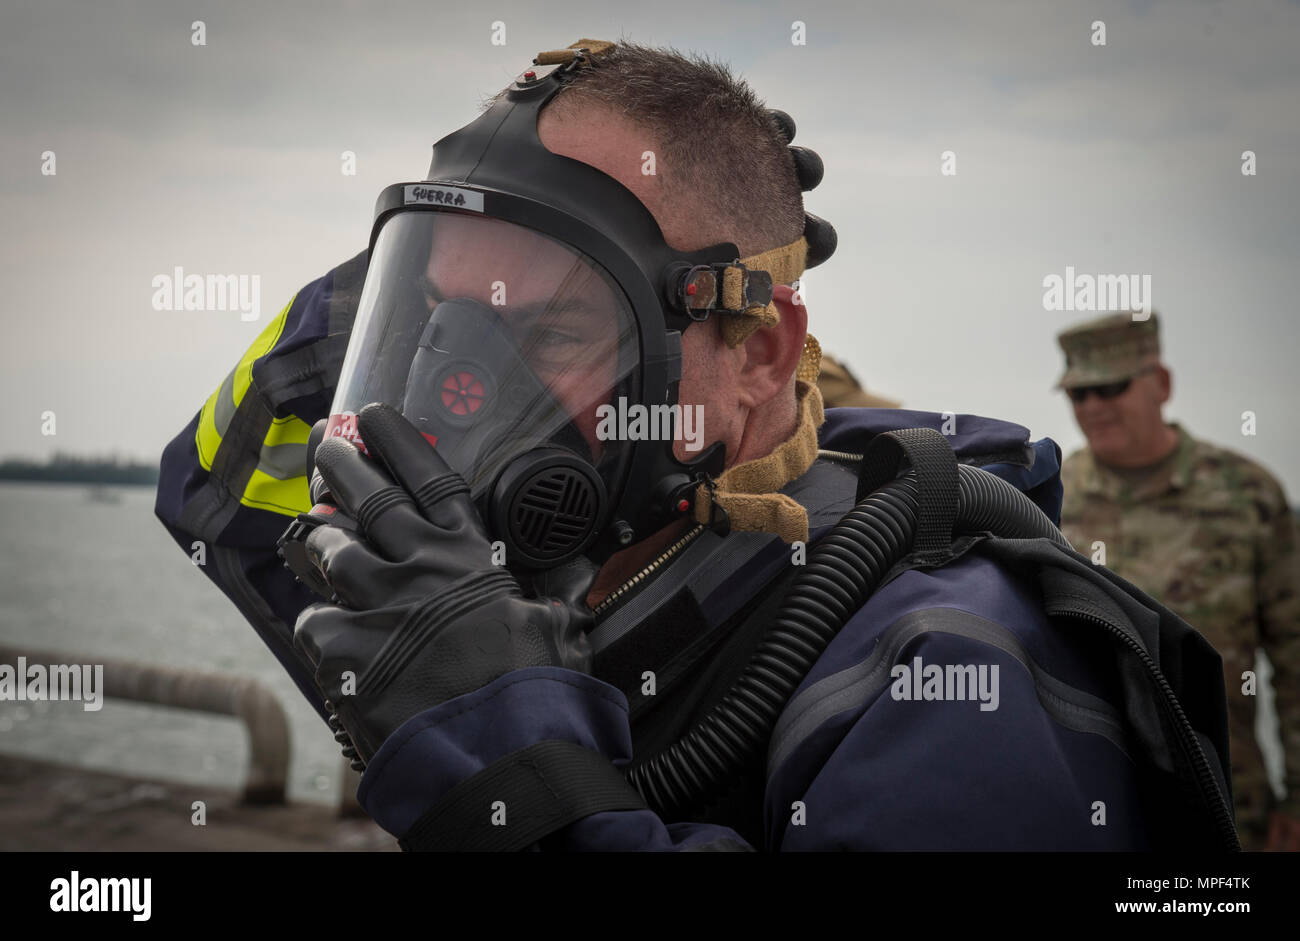 David Guerra, Miami-Dade Fire Rescue air rescue flight medic, dons an oxygen mask during a hazardous material decontamination exercise on the Port of Miami, Fla. Feb 18, 2017.The exercise was led by Miami-Dade Fire Rescue and U.S. Army North under the supervision of U.S. Northern Command and provided soldiers and first responders the unique experience of operating together in a major metropolitan city. (U.S. Air Force photo by Staff Sgt. Cory D. Payne) Stock Photo